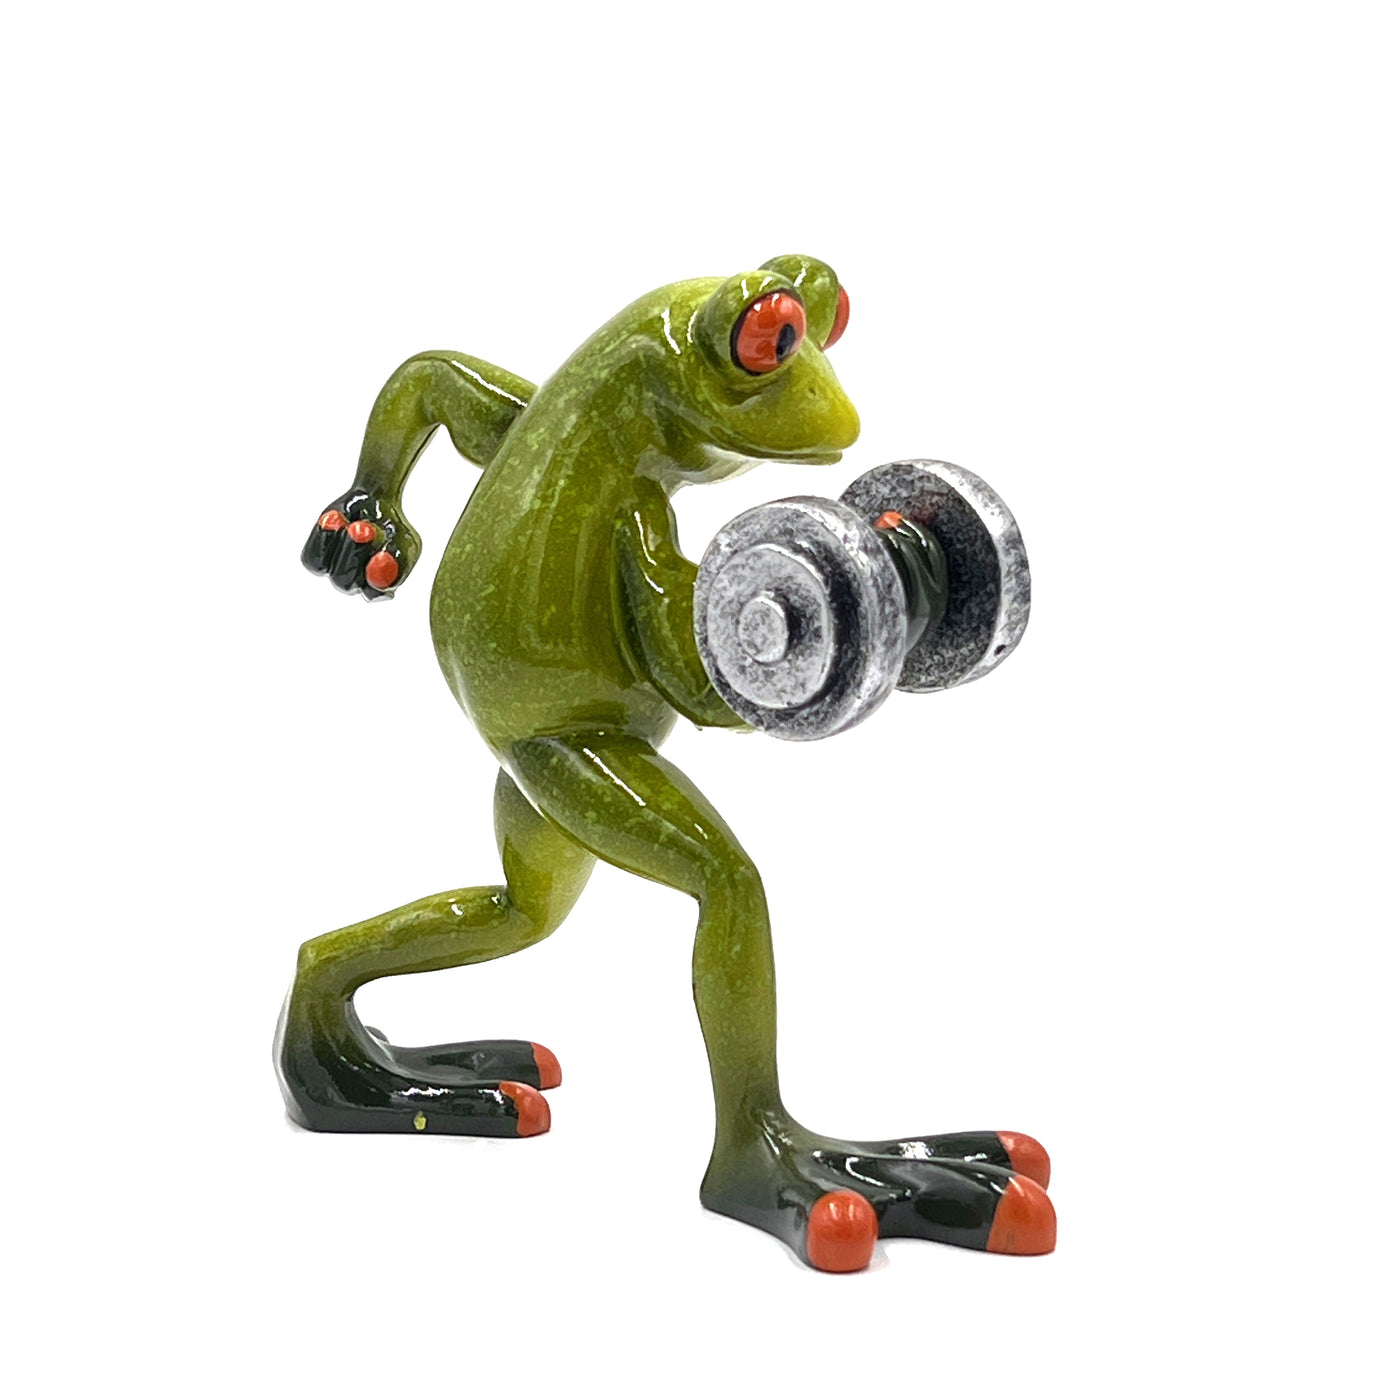 Comical Frog Ornament - Weight Lifter